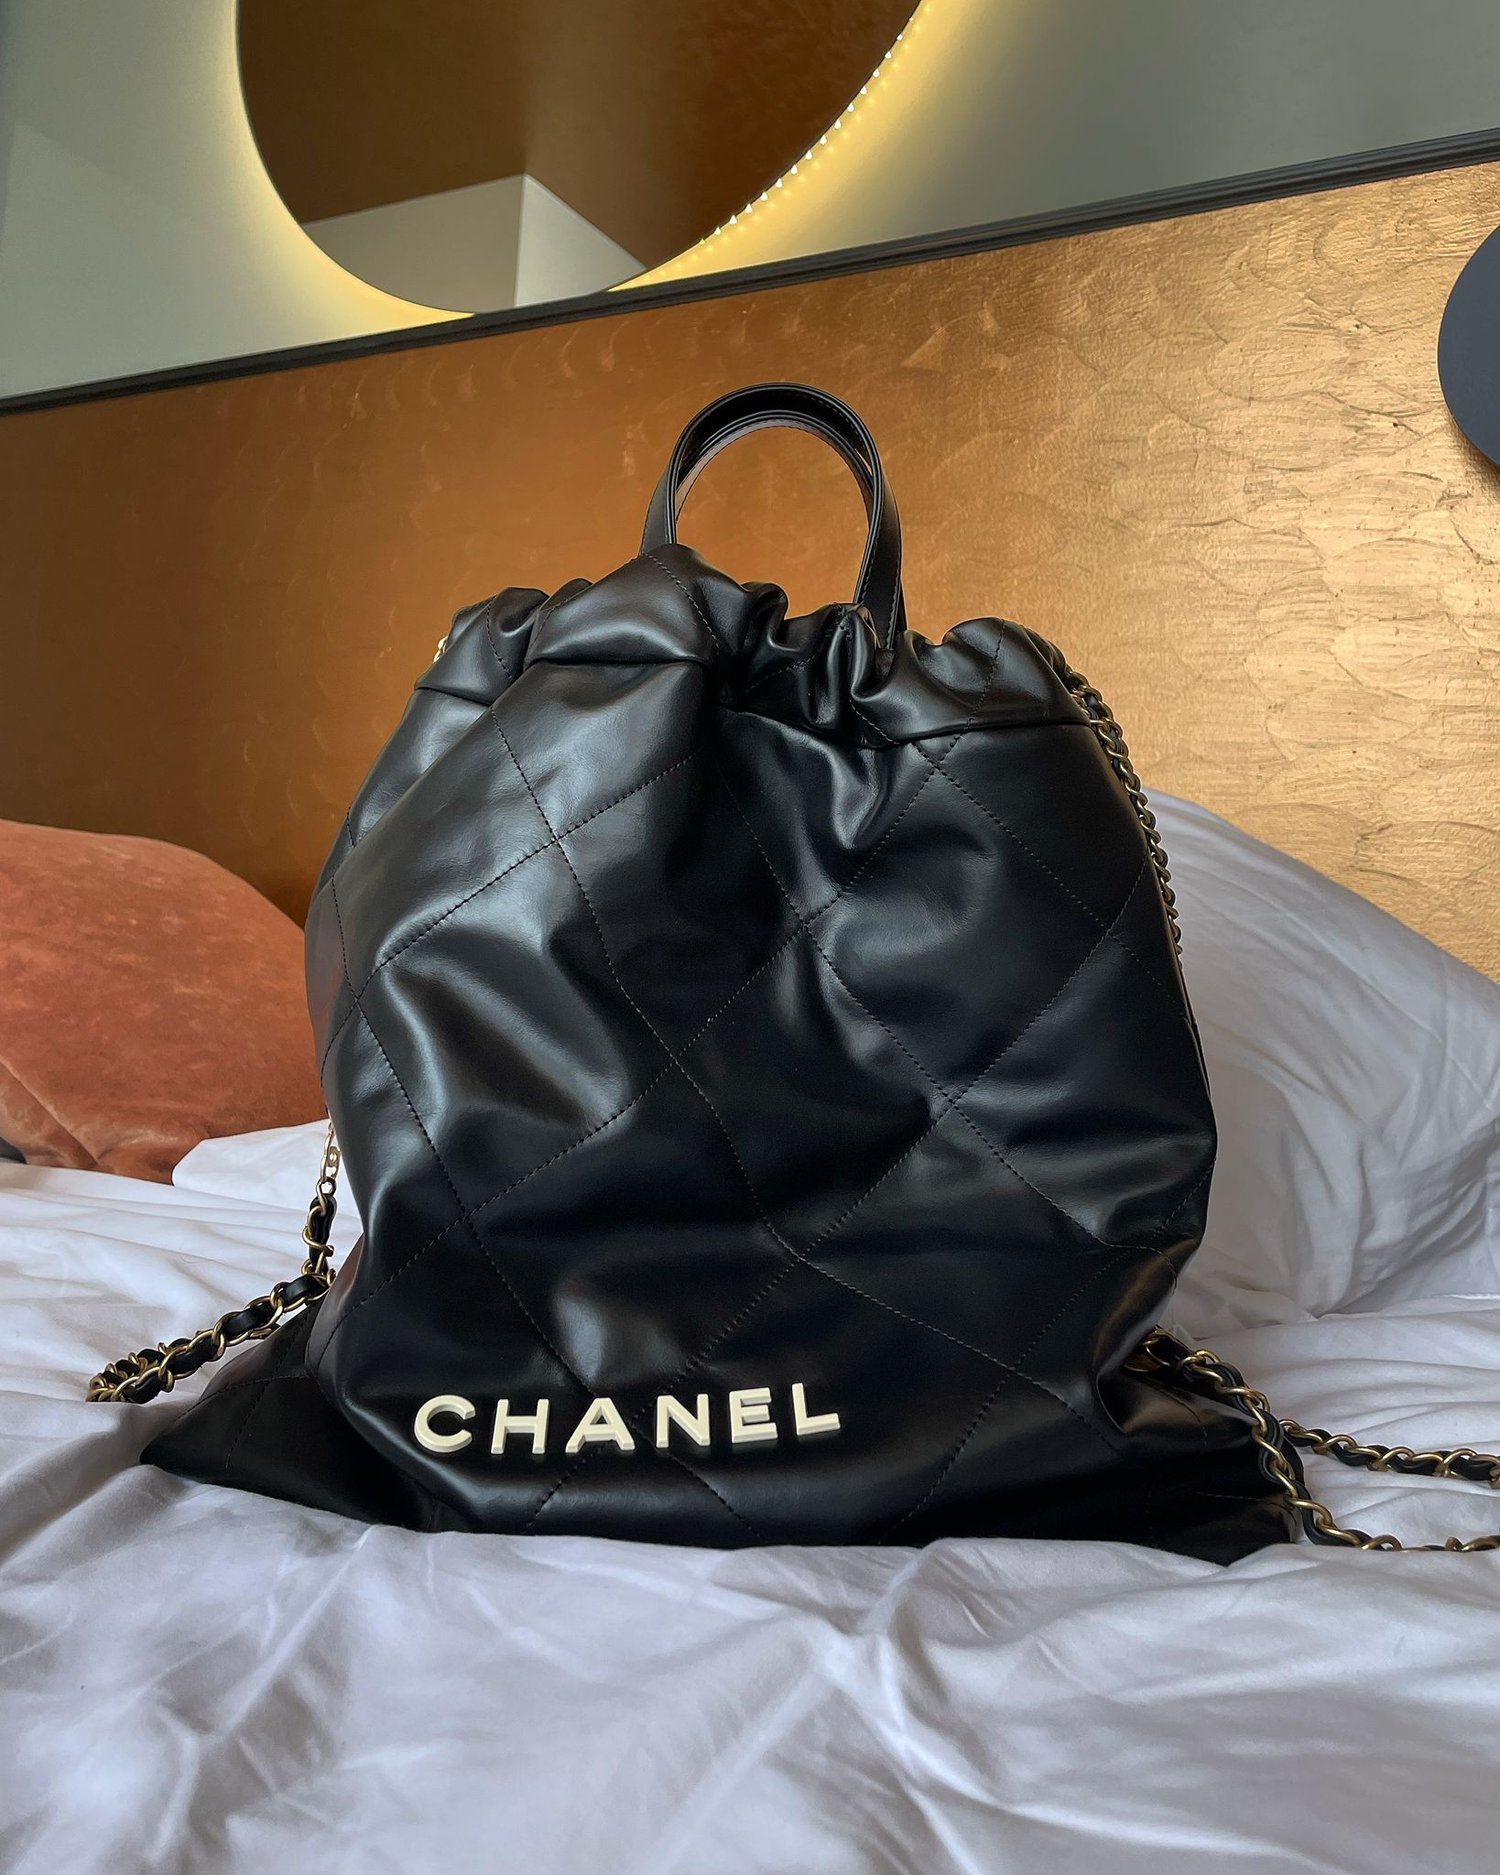 My Chanel 22 BAG Update: Personal Experience - Is It Falling Apart